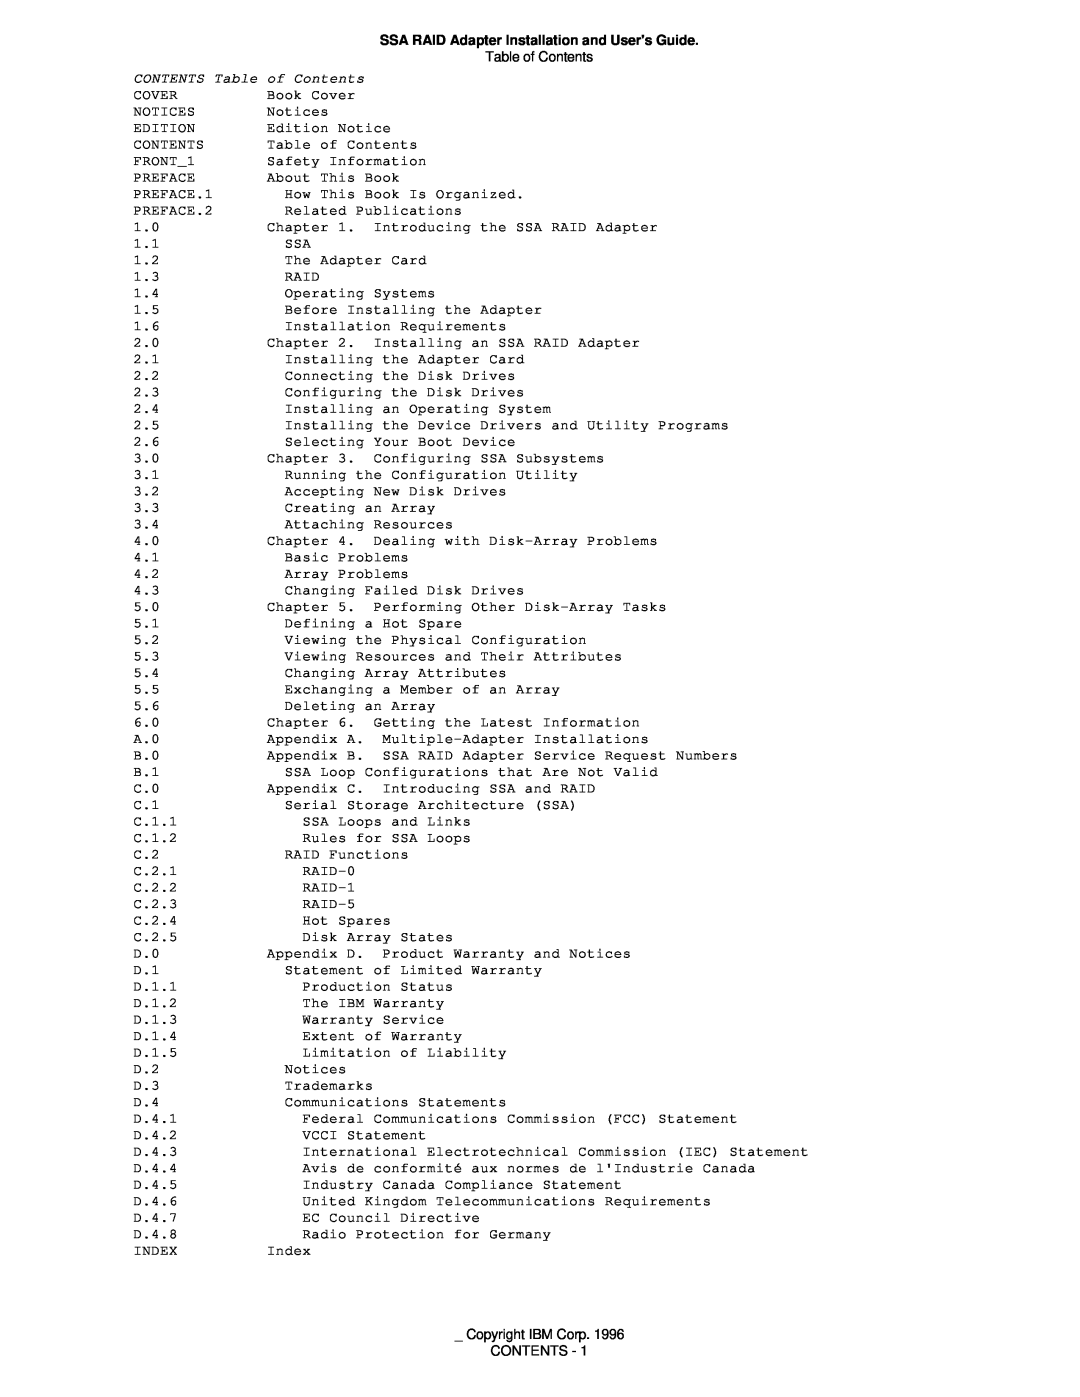 IBM 32H3816 SSA RAID Adapter Installation and Users Guide, CONTENTS Table of Contents, Copyright IBM Corp CONTENTS 